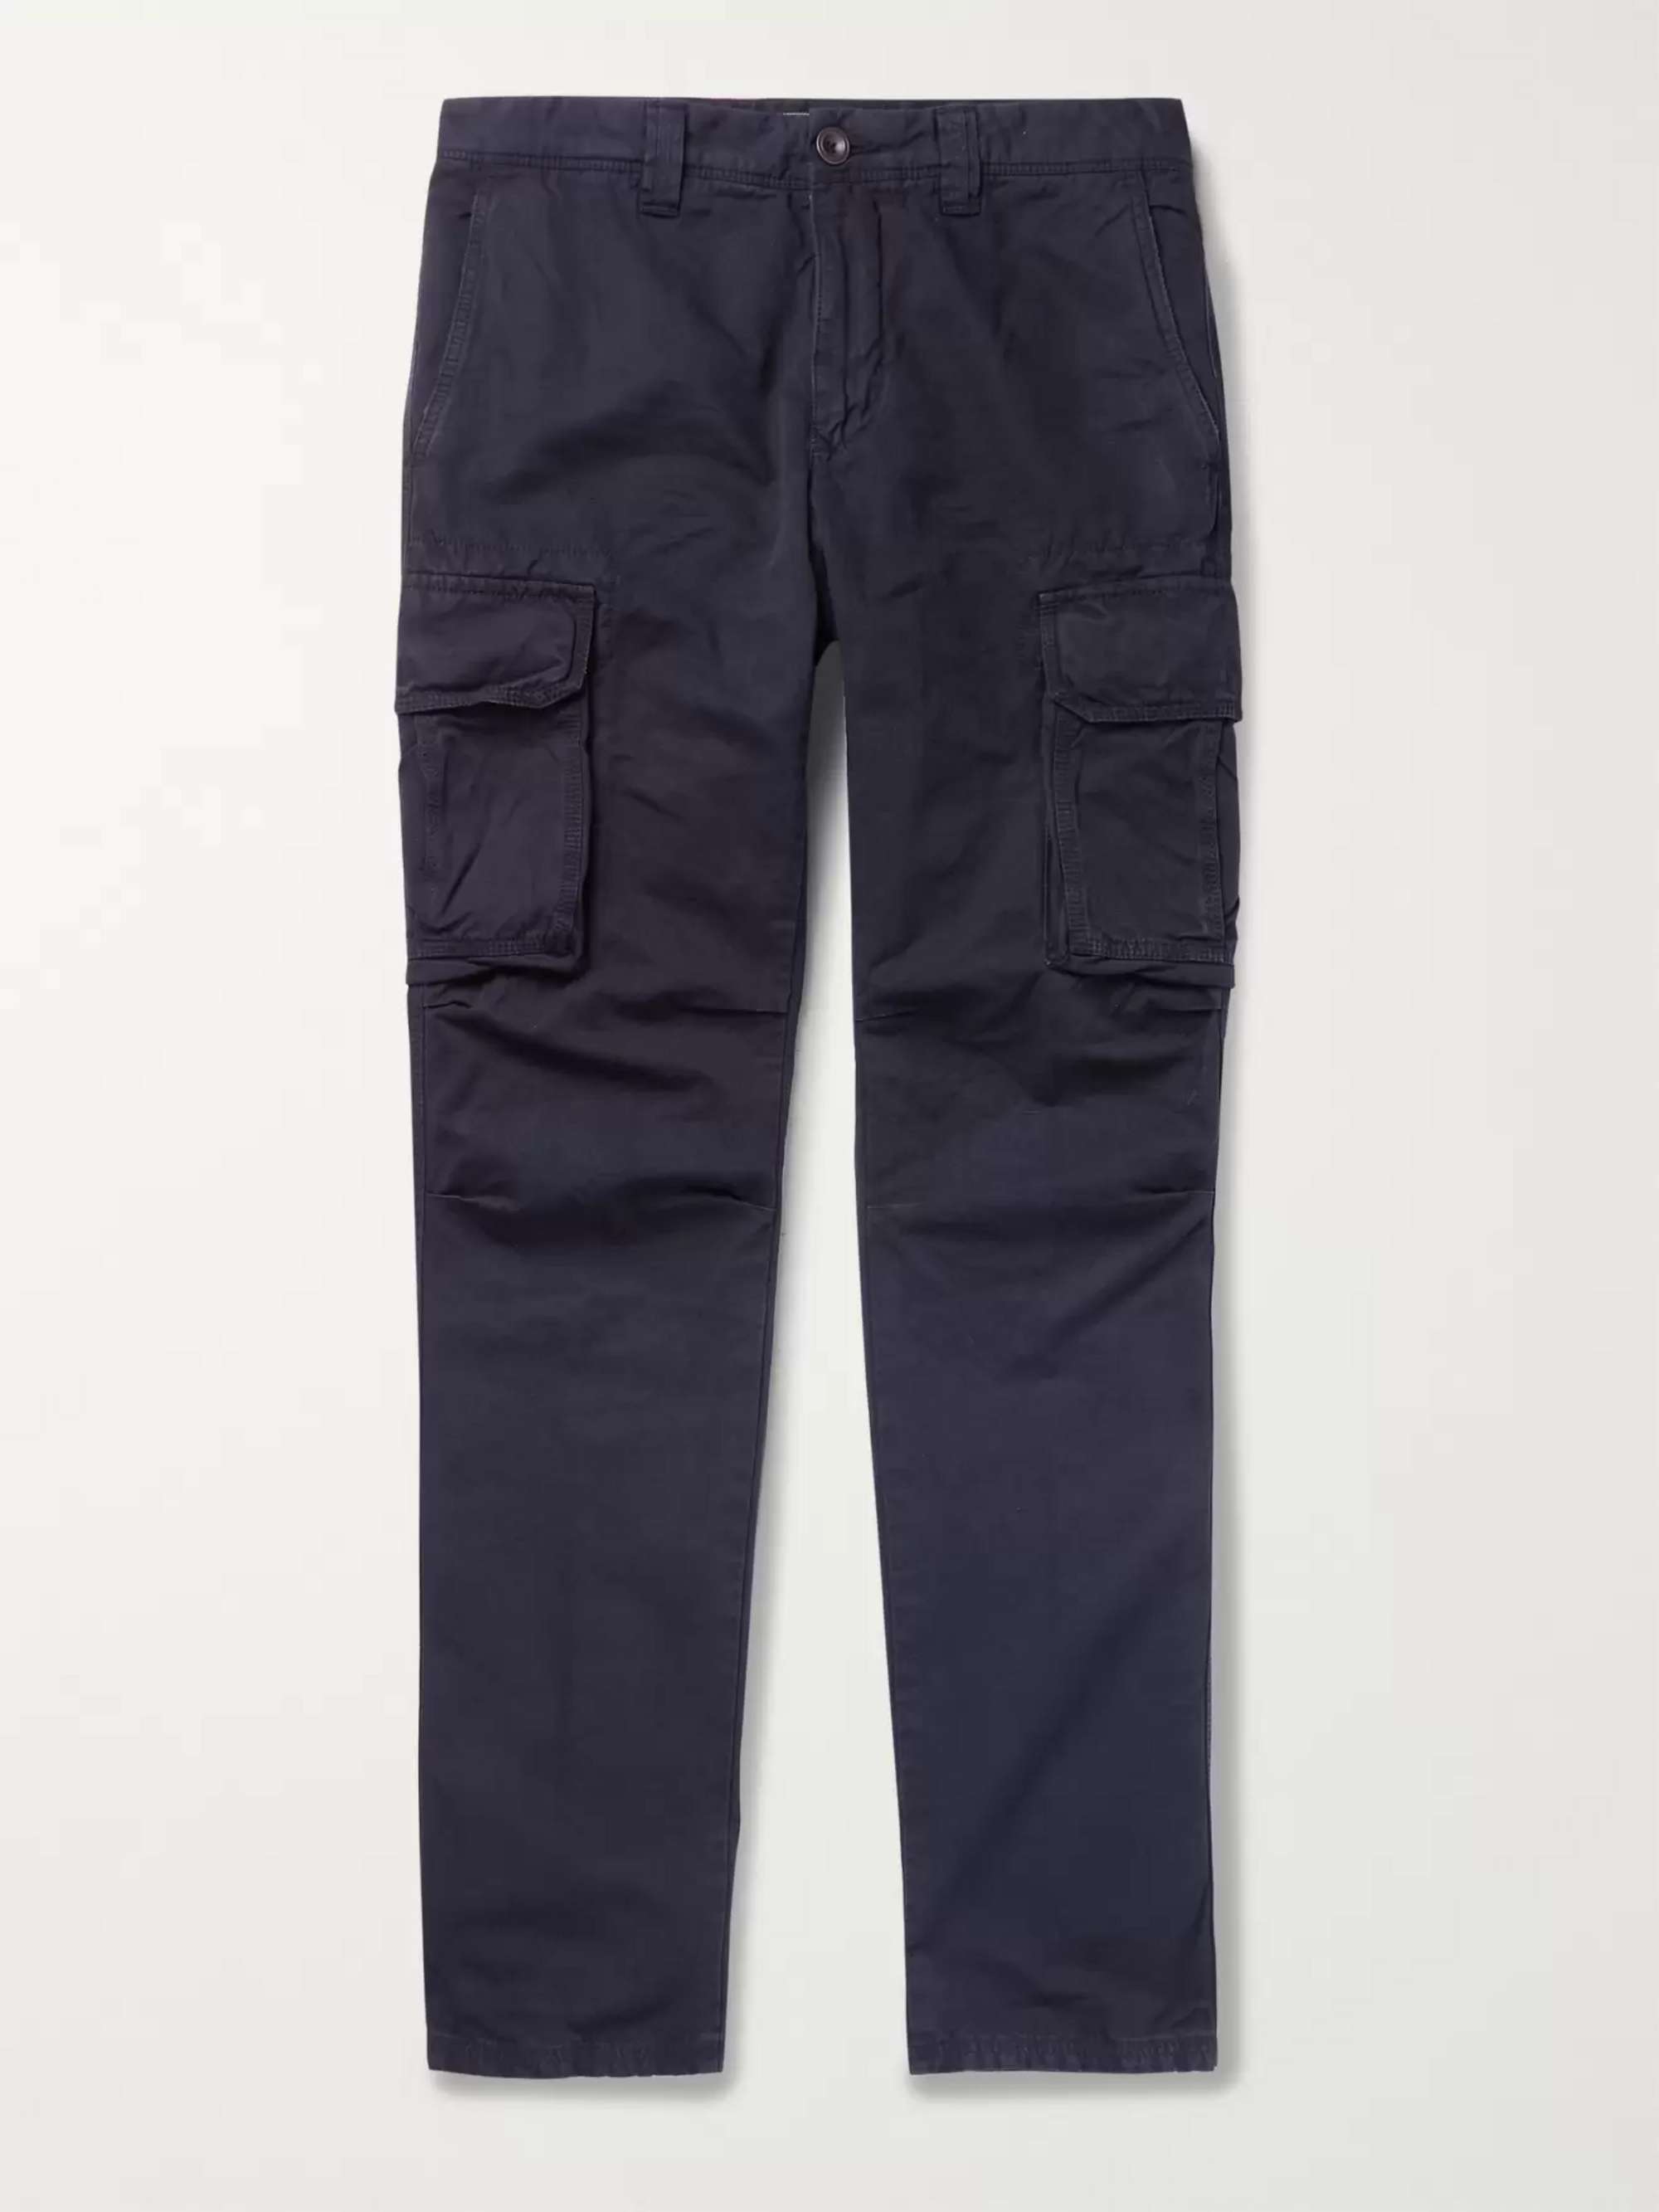 Buy Navy blue Cargo pant for men Online In India At Discounted Prices